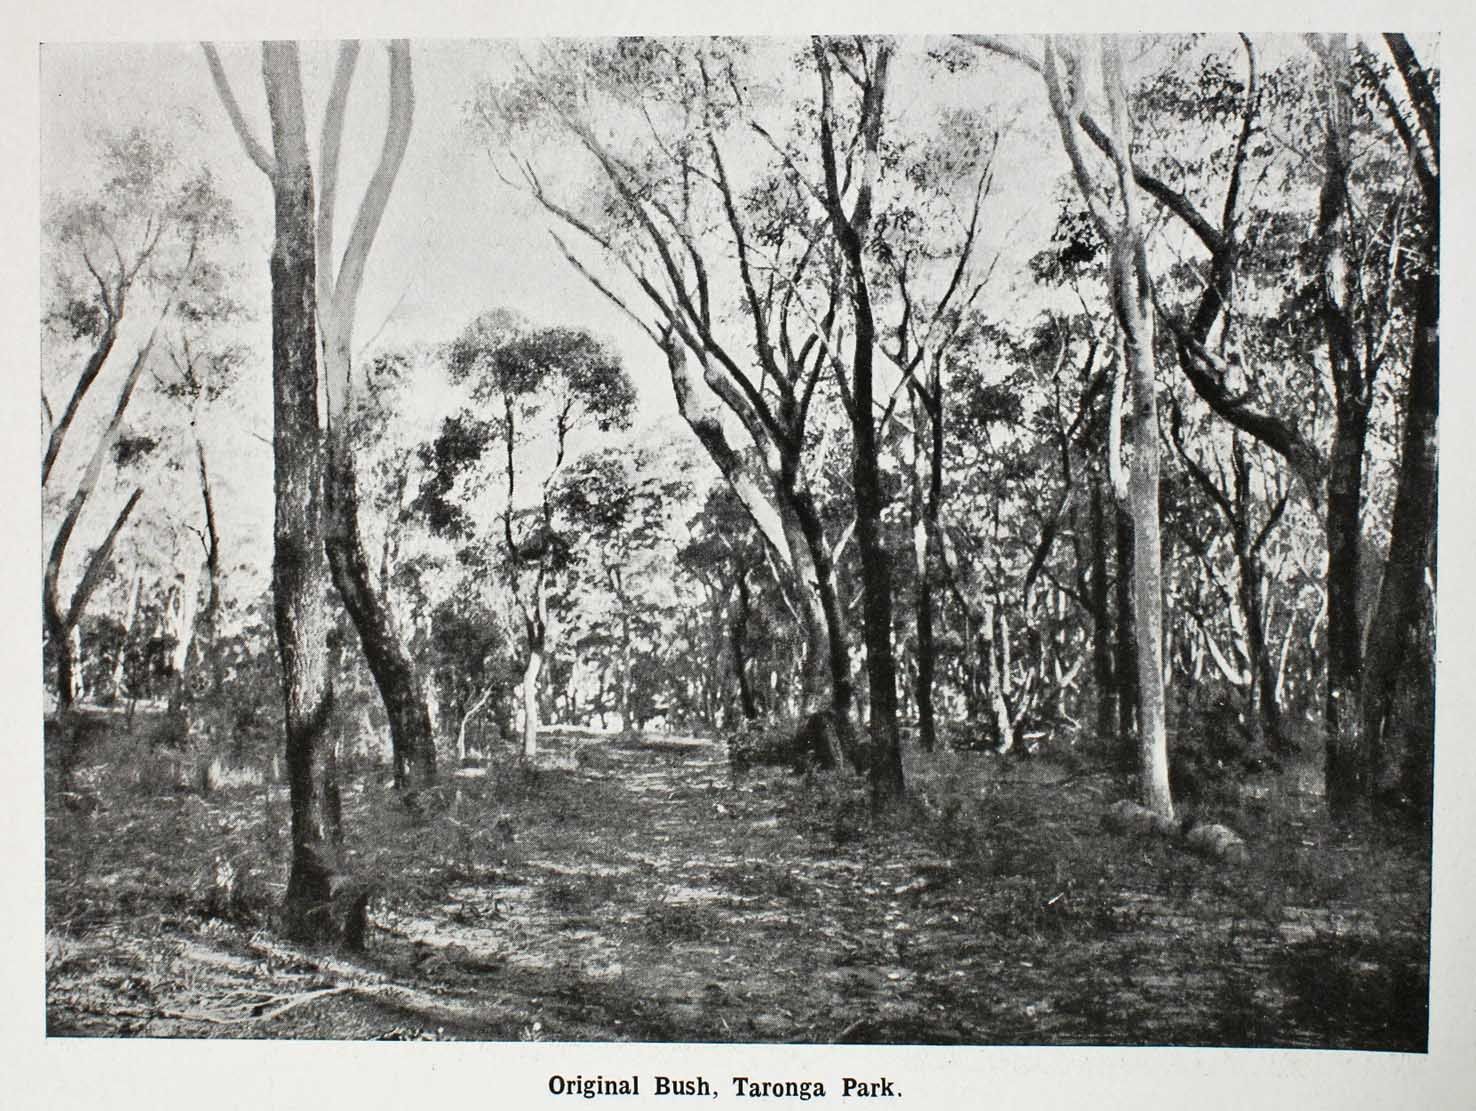 Bushland that was cleared for Taronga Park